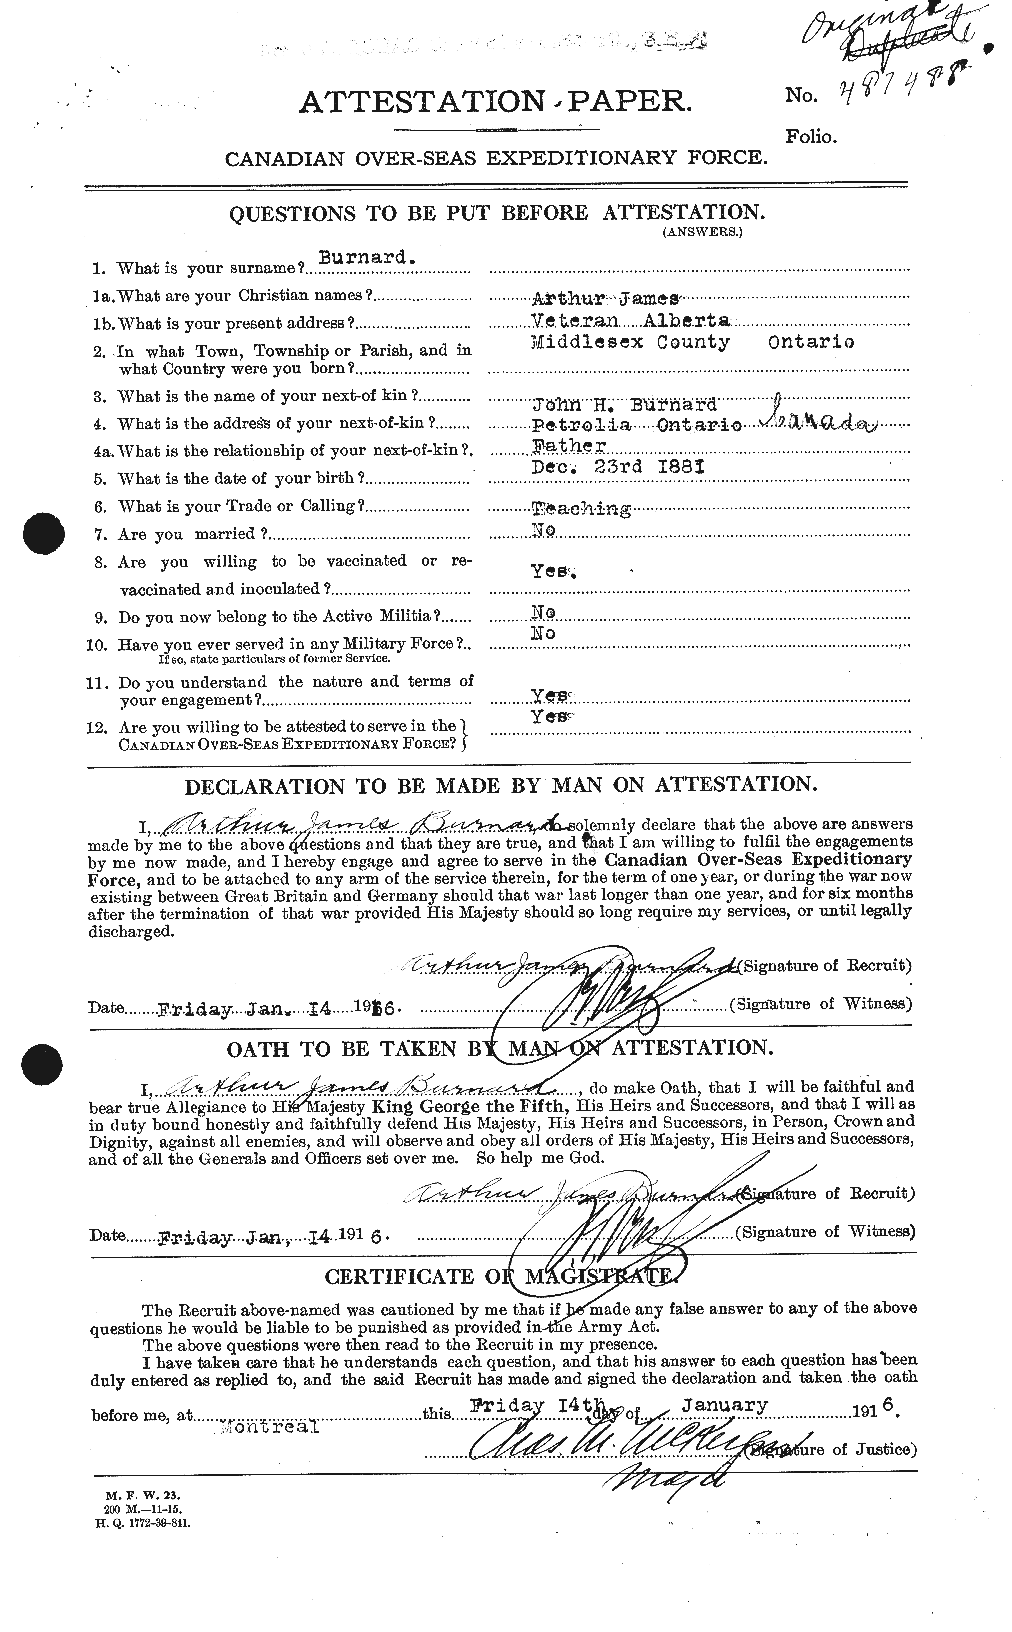 Personnel Records of the First World War - CEF 271964a